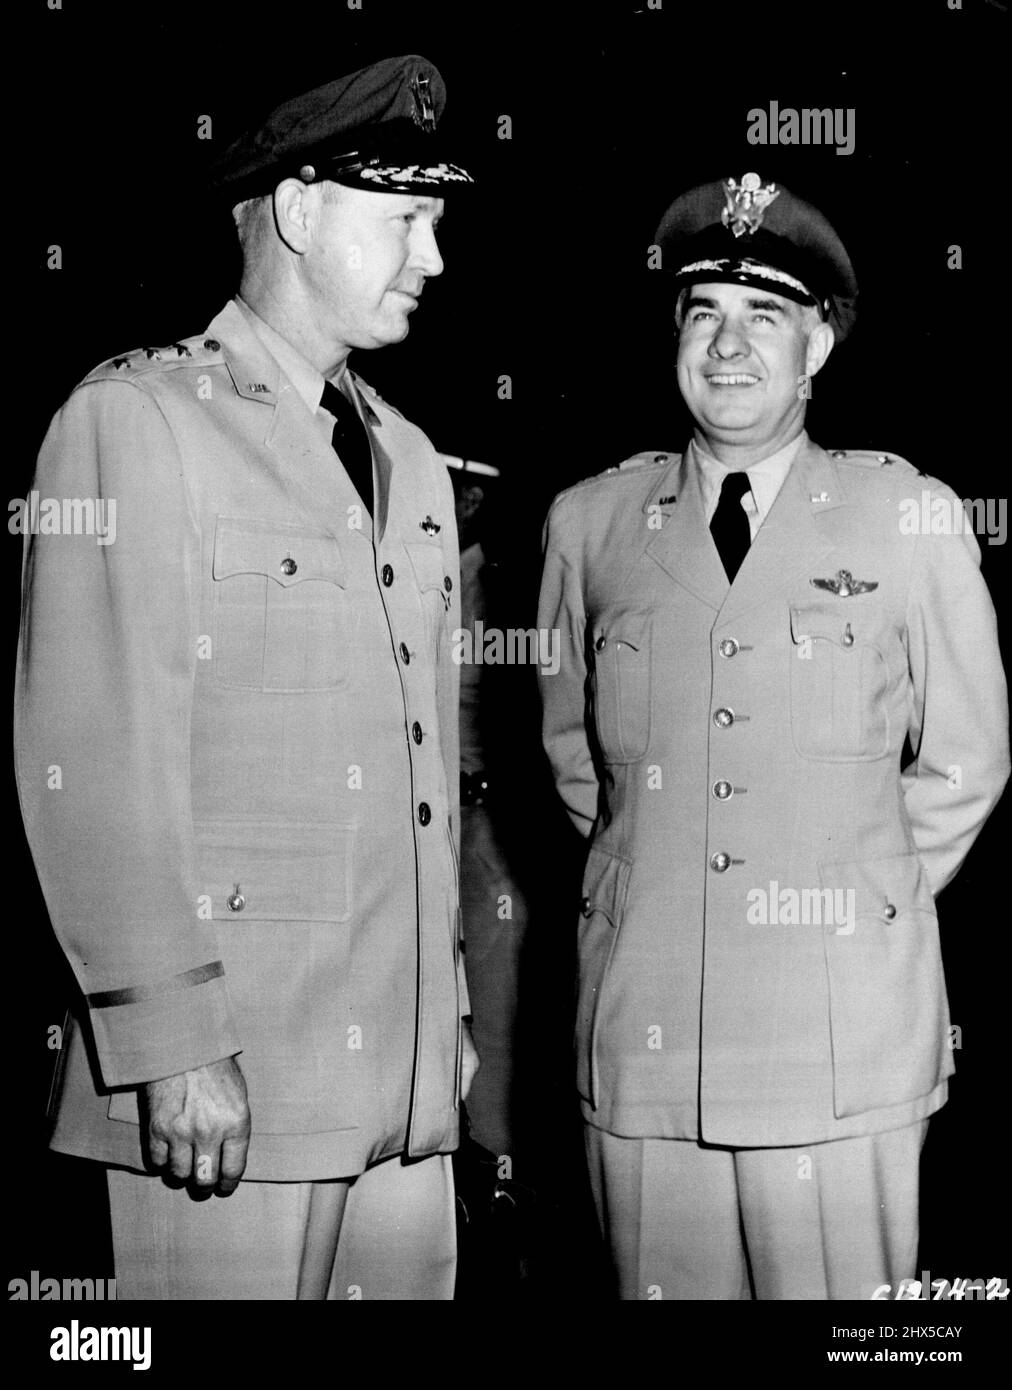 Lt. Gen. Otto P. Weyland, left, and Maj. Gen. Frank Everest, recently appointed commanders of the Far East Air Force and Fifth Air Force respectively, arrived at the Haneda Airport near Tokyo May 29. The two commanders succeed Lt. Gen. George E. Stratemeyer, relived due to illness, and Lt. Gen. ***** E. Partridge, scheduled for reassignment in the United States. May 30, 1951. (Photo by U. S. Air Force Photo). Stock Photo